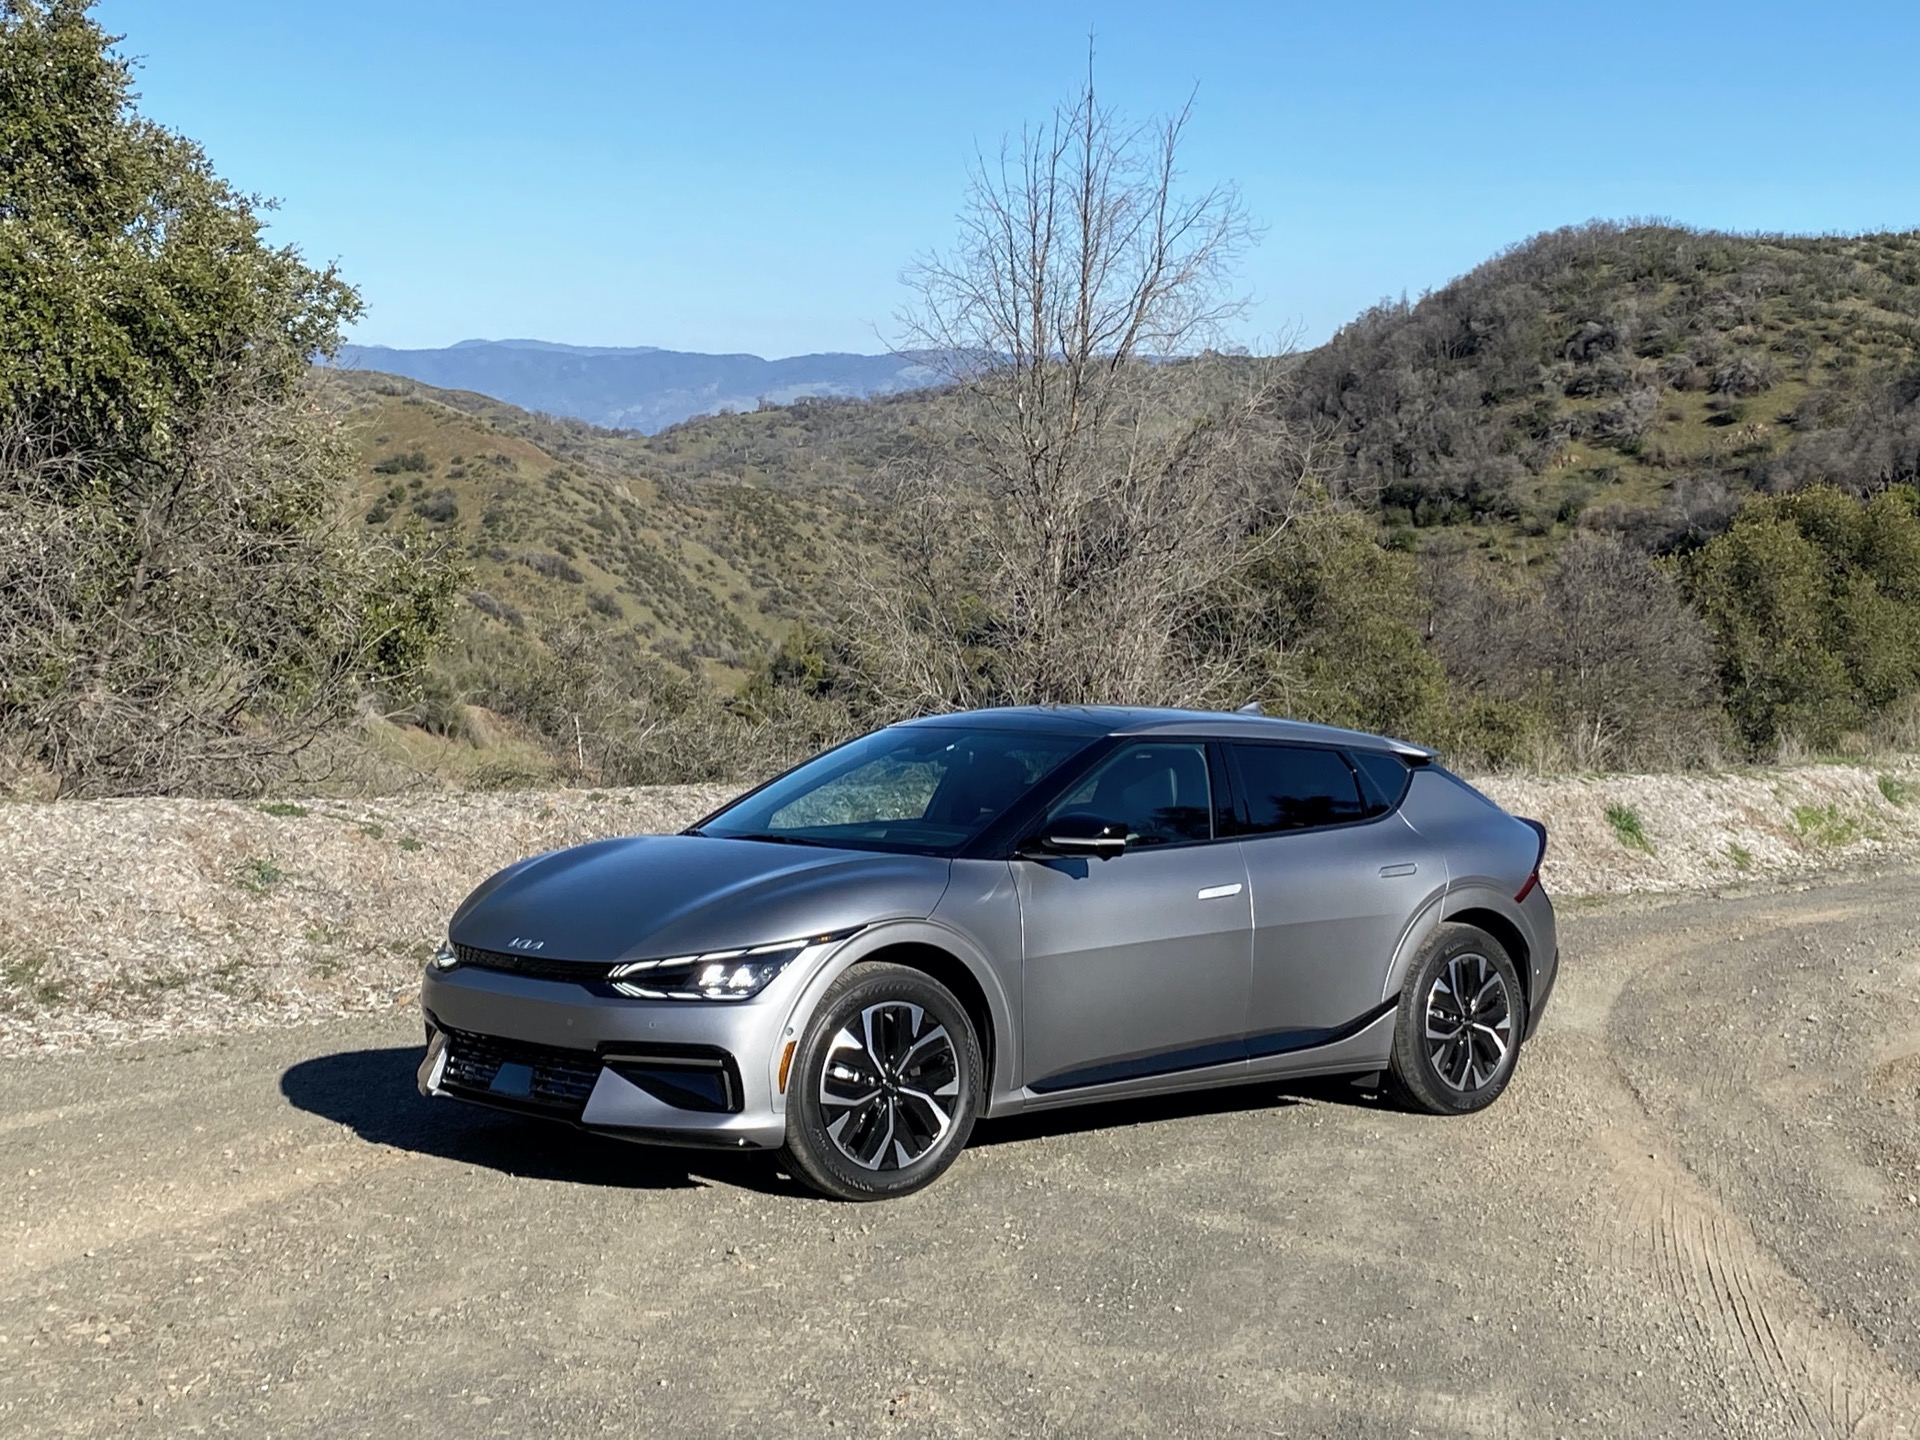 First drive review: 2022 Kia EV6 electric car is a hoot, and it hits reset for the brandFirst drive review: 2022 Kia EV6 electric car is a hoot, and it hits reset for the brand